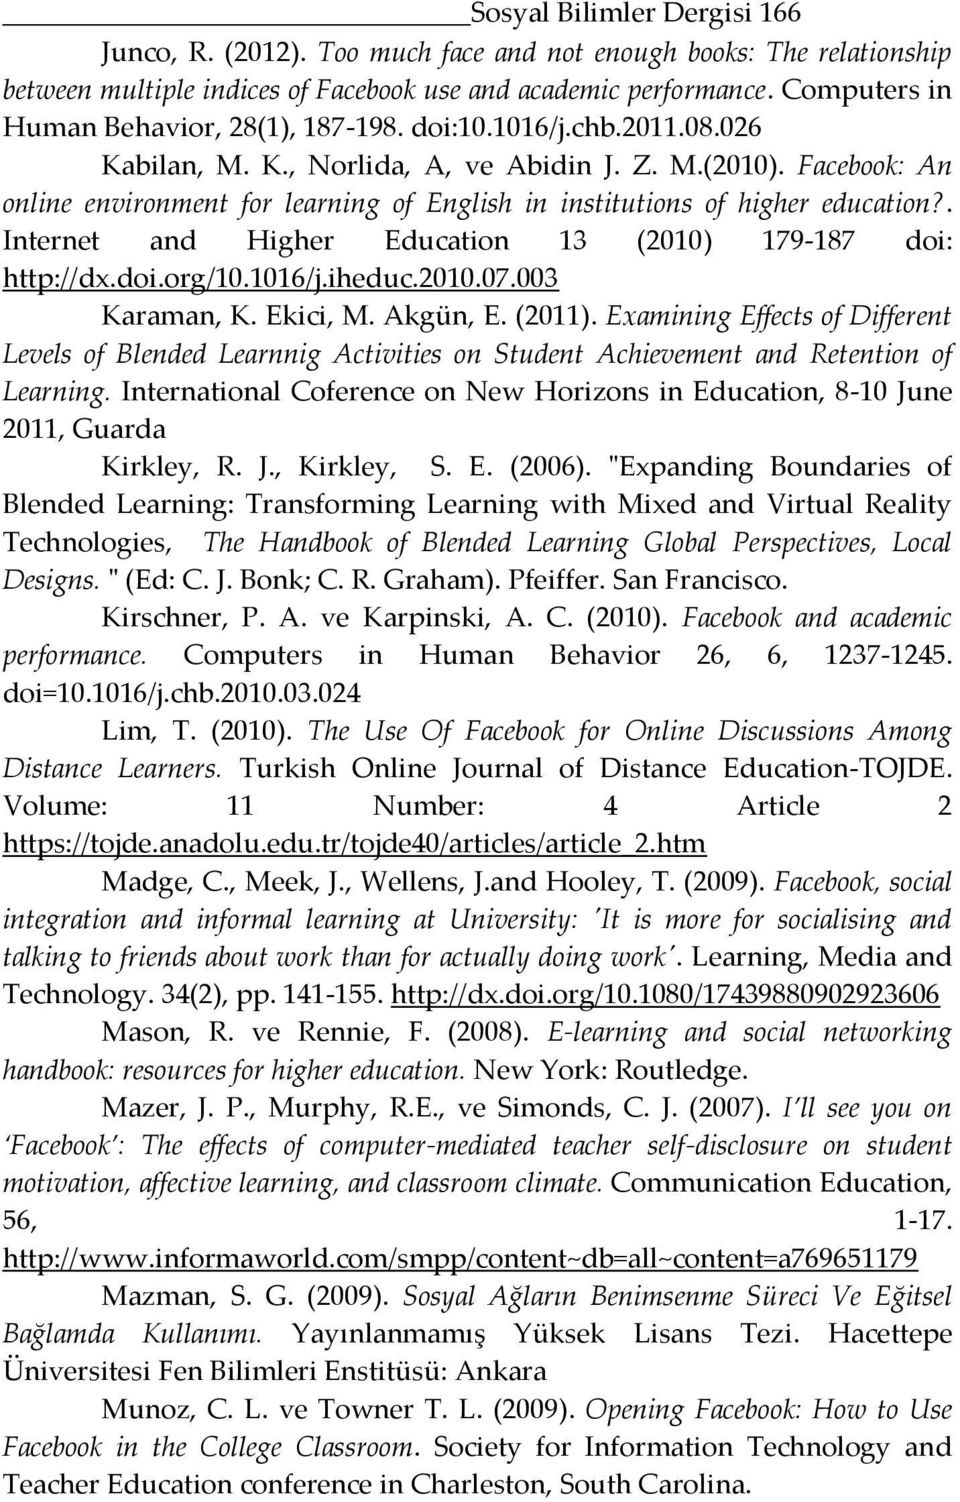 Facebook: An online environment for learning of English in institutions of higher education?. Internet and Higher Education 13 (2010) 179-187 doi: http://dx.doi.org/10.1016/j.iheduc.2010.07.